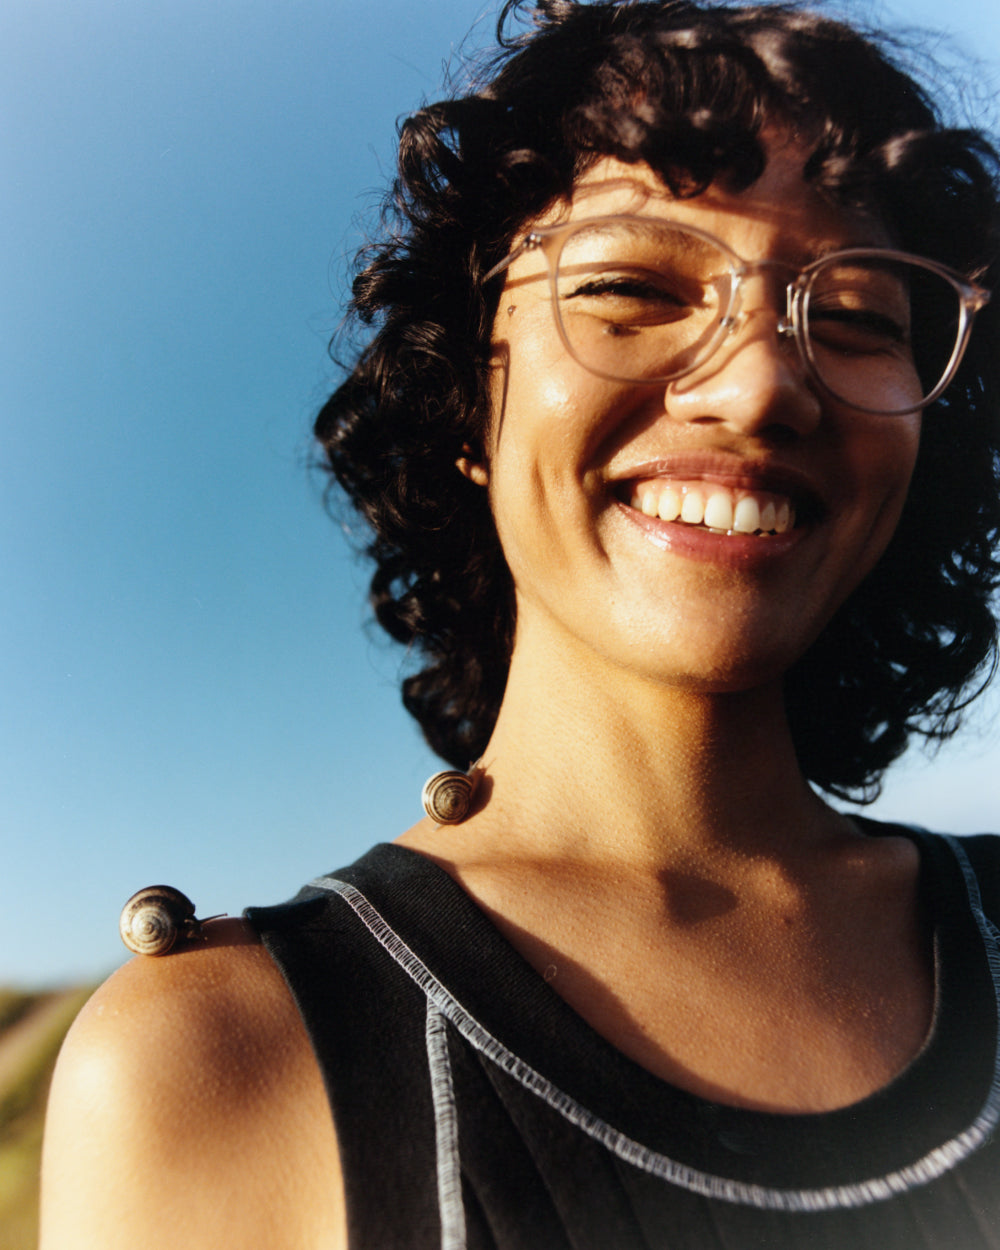 Airframe lightweight glasses on a female model